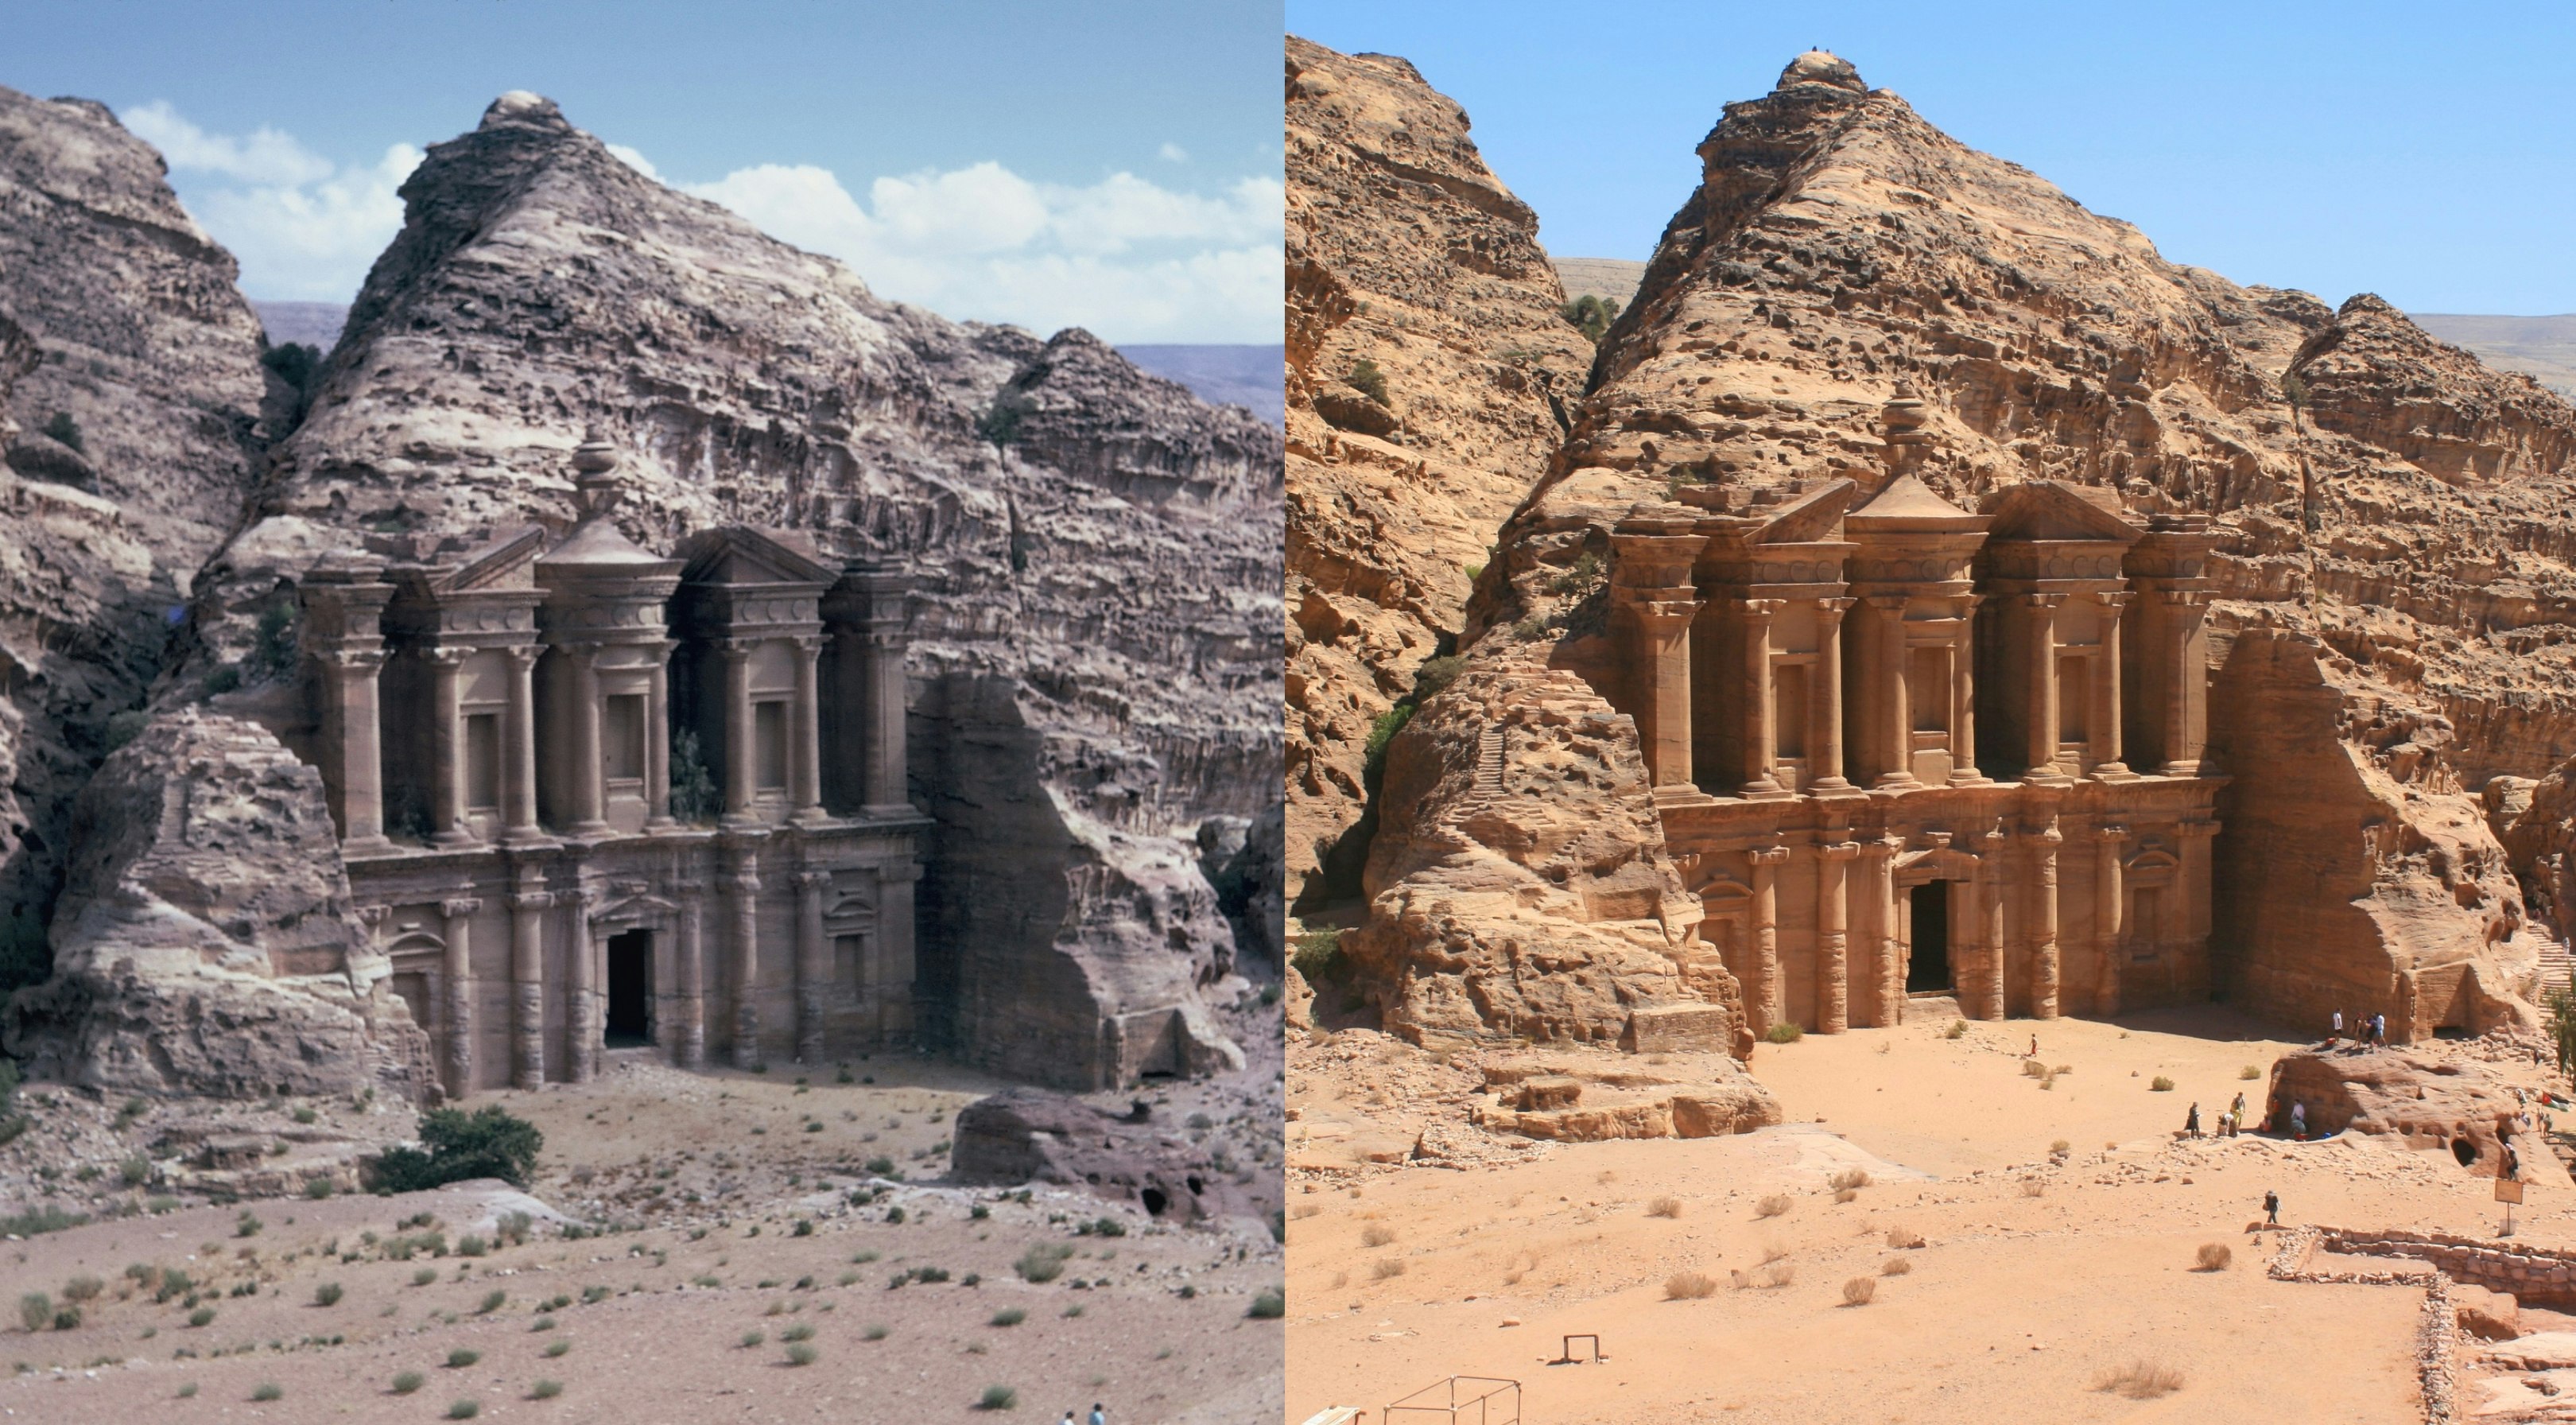 Two almost identical images of a huge rock-hewn facade in a large cliff face, one taken in 1972, the other 2019.